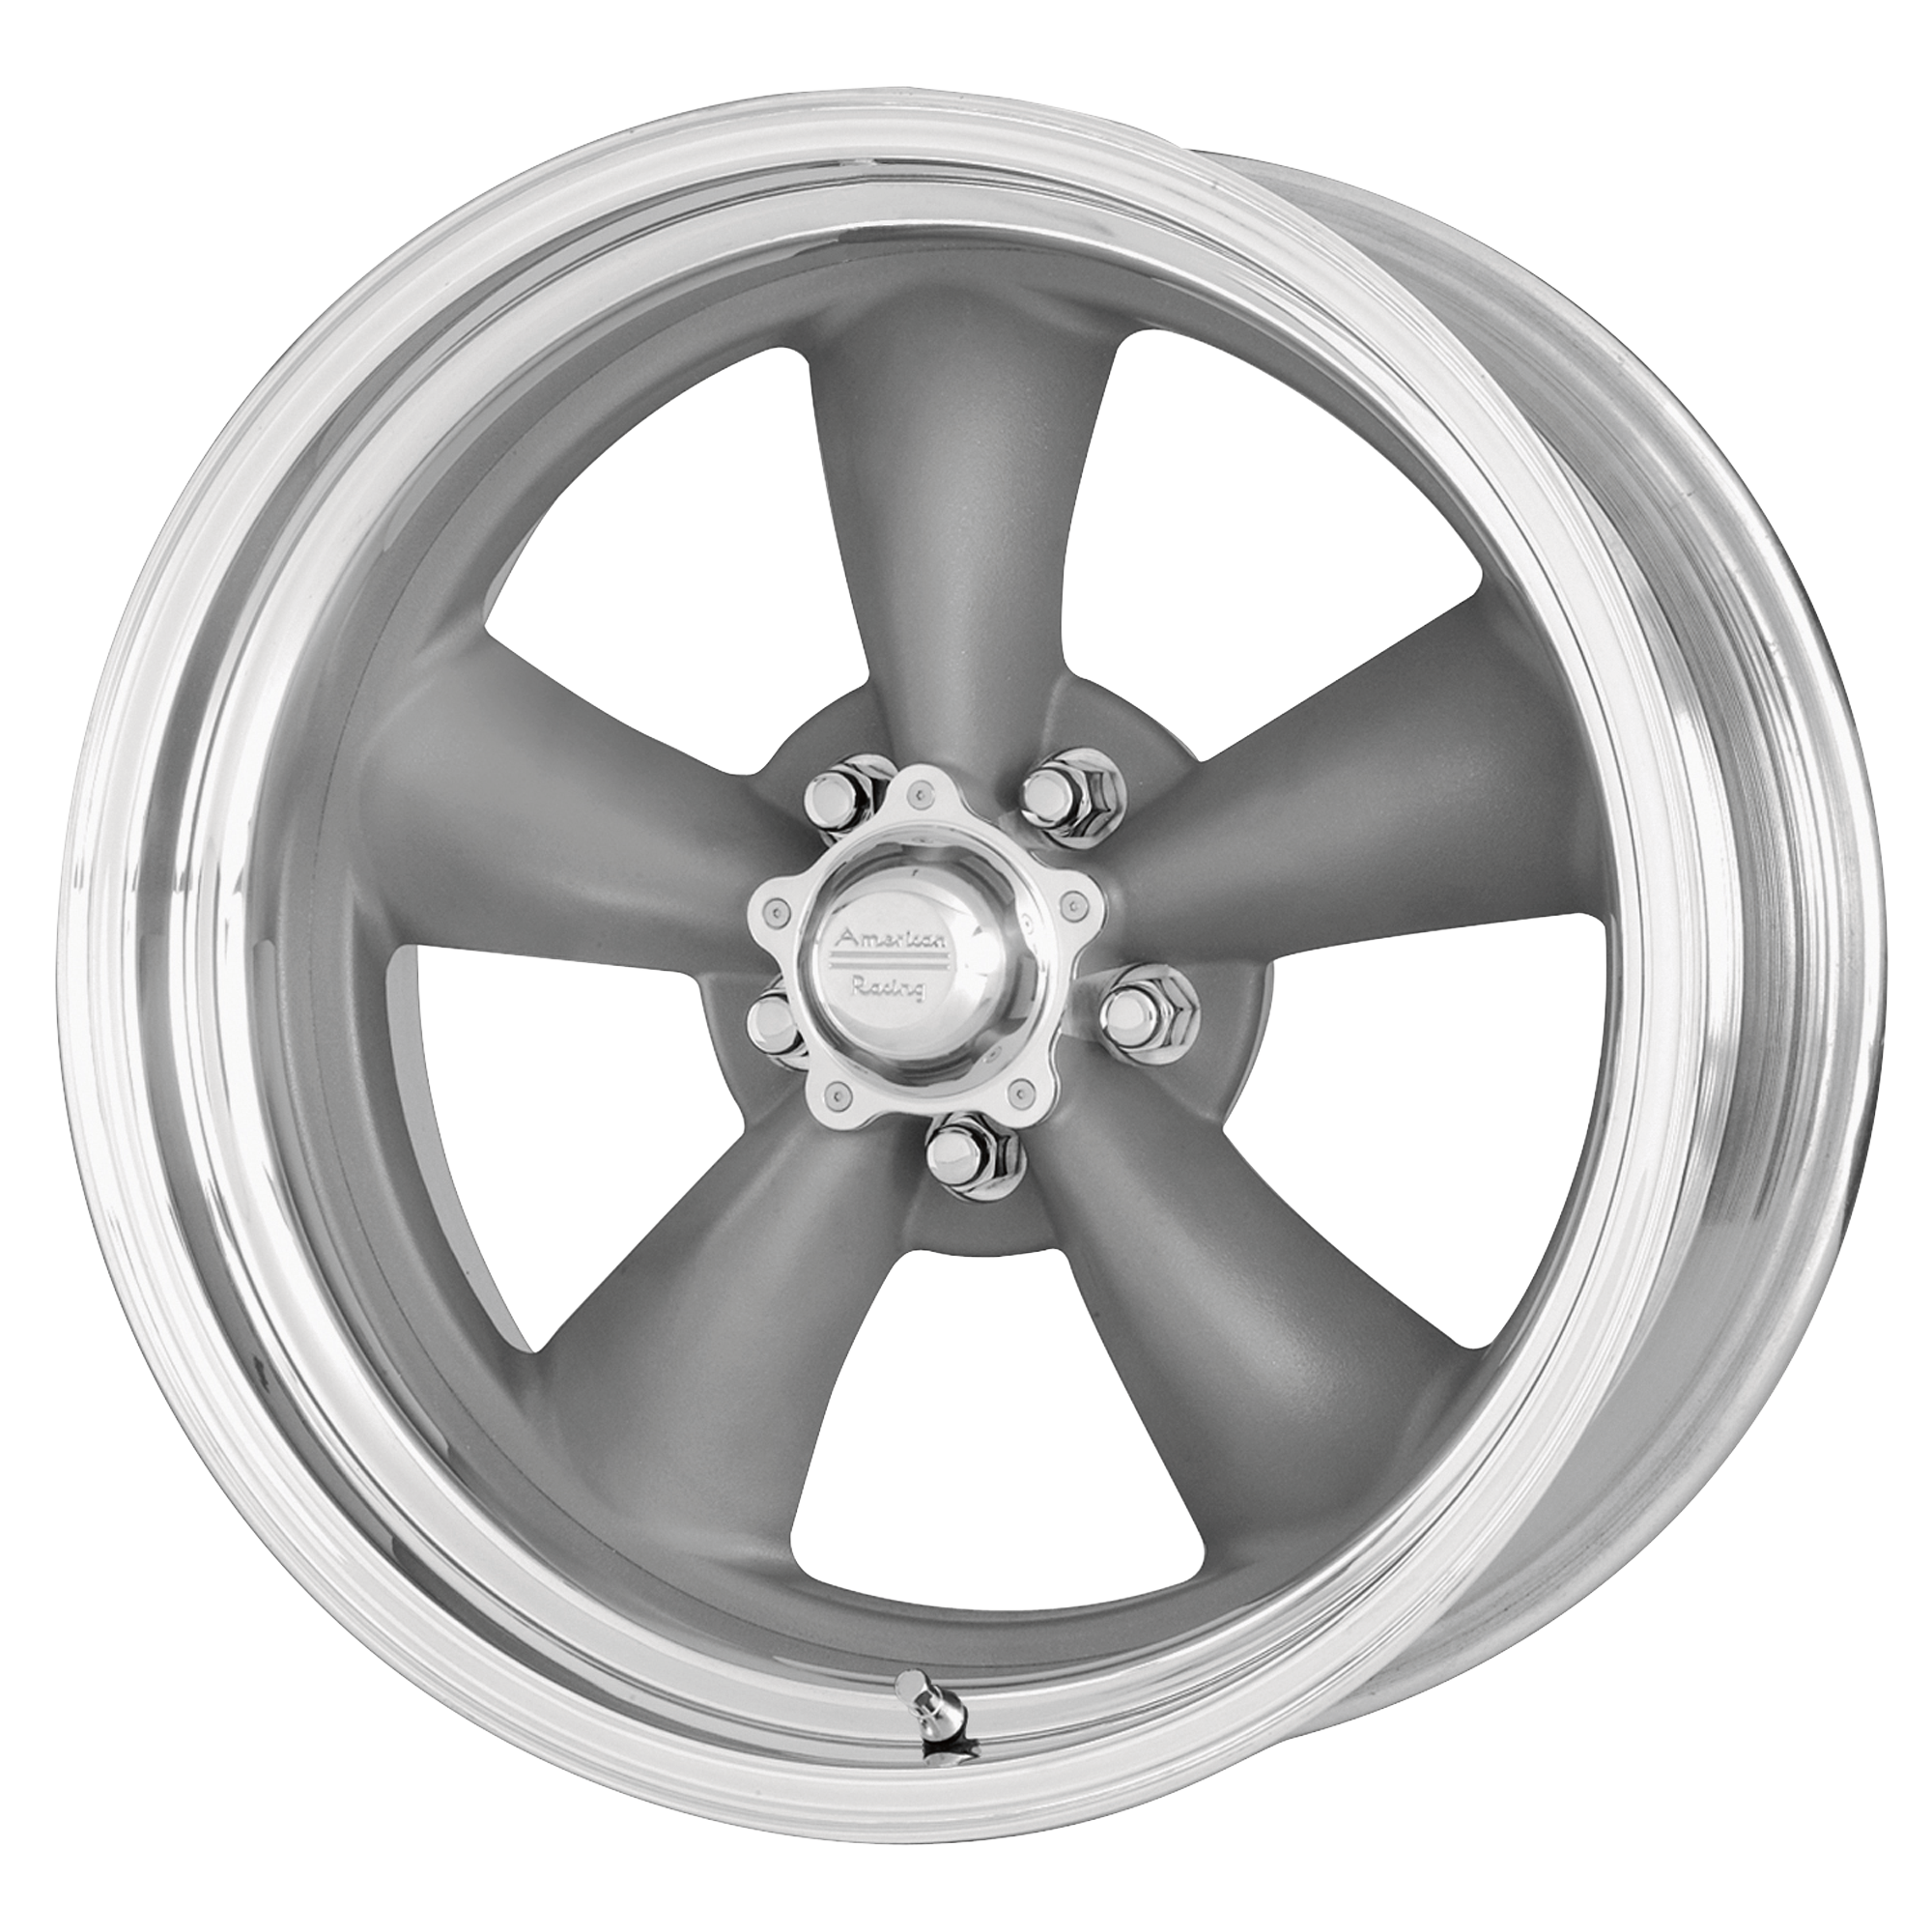 CLASSIC TORQ THRUST II ONE PIECE 15x6 5x120.65 MAG GRAY W/ MACHINED LIP (-6 mm) - Tires and Engine Performance